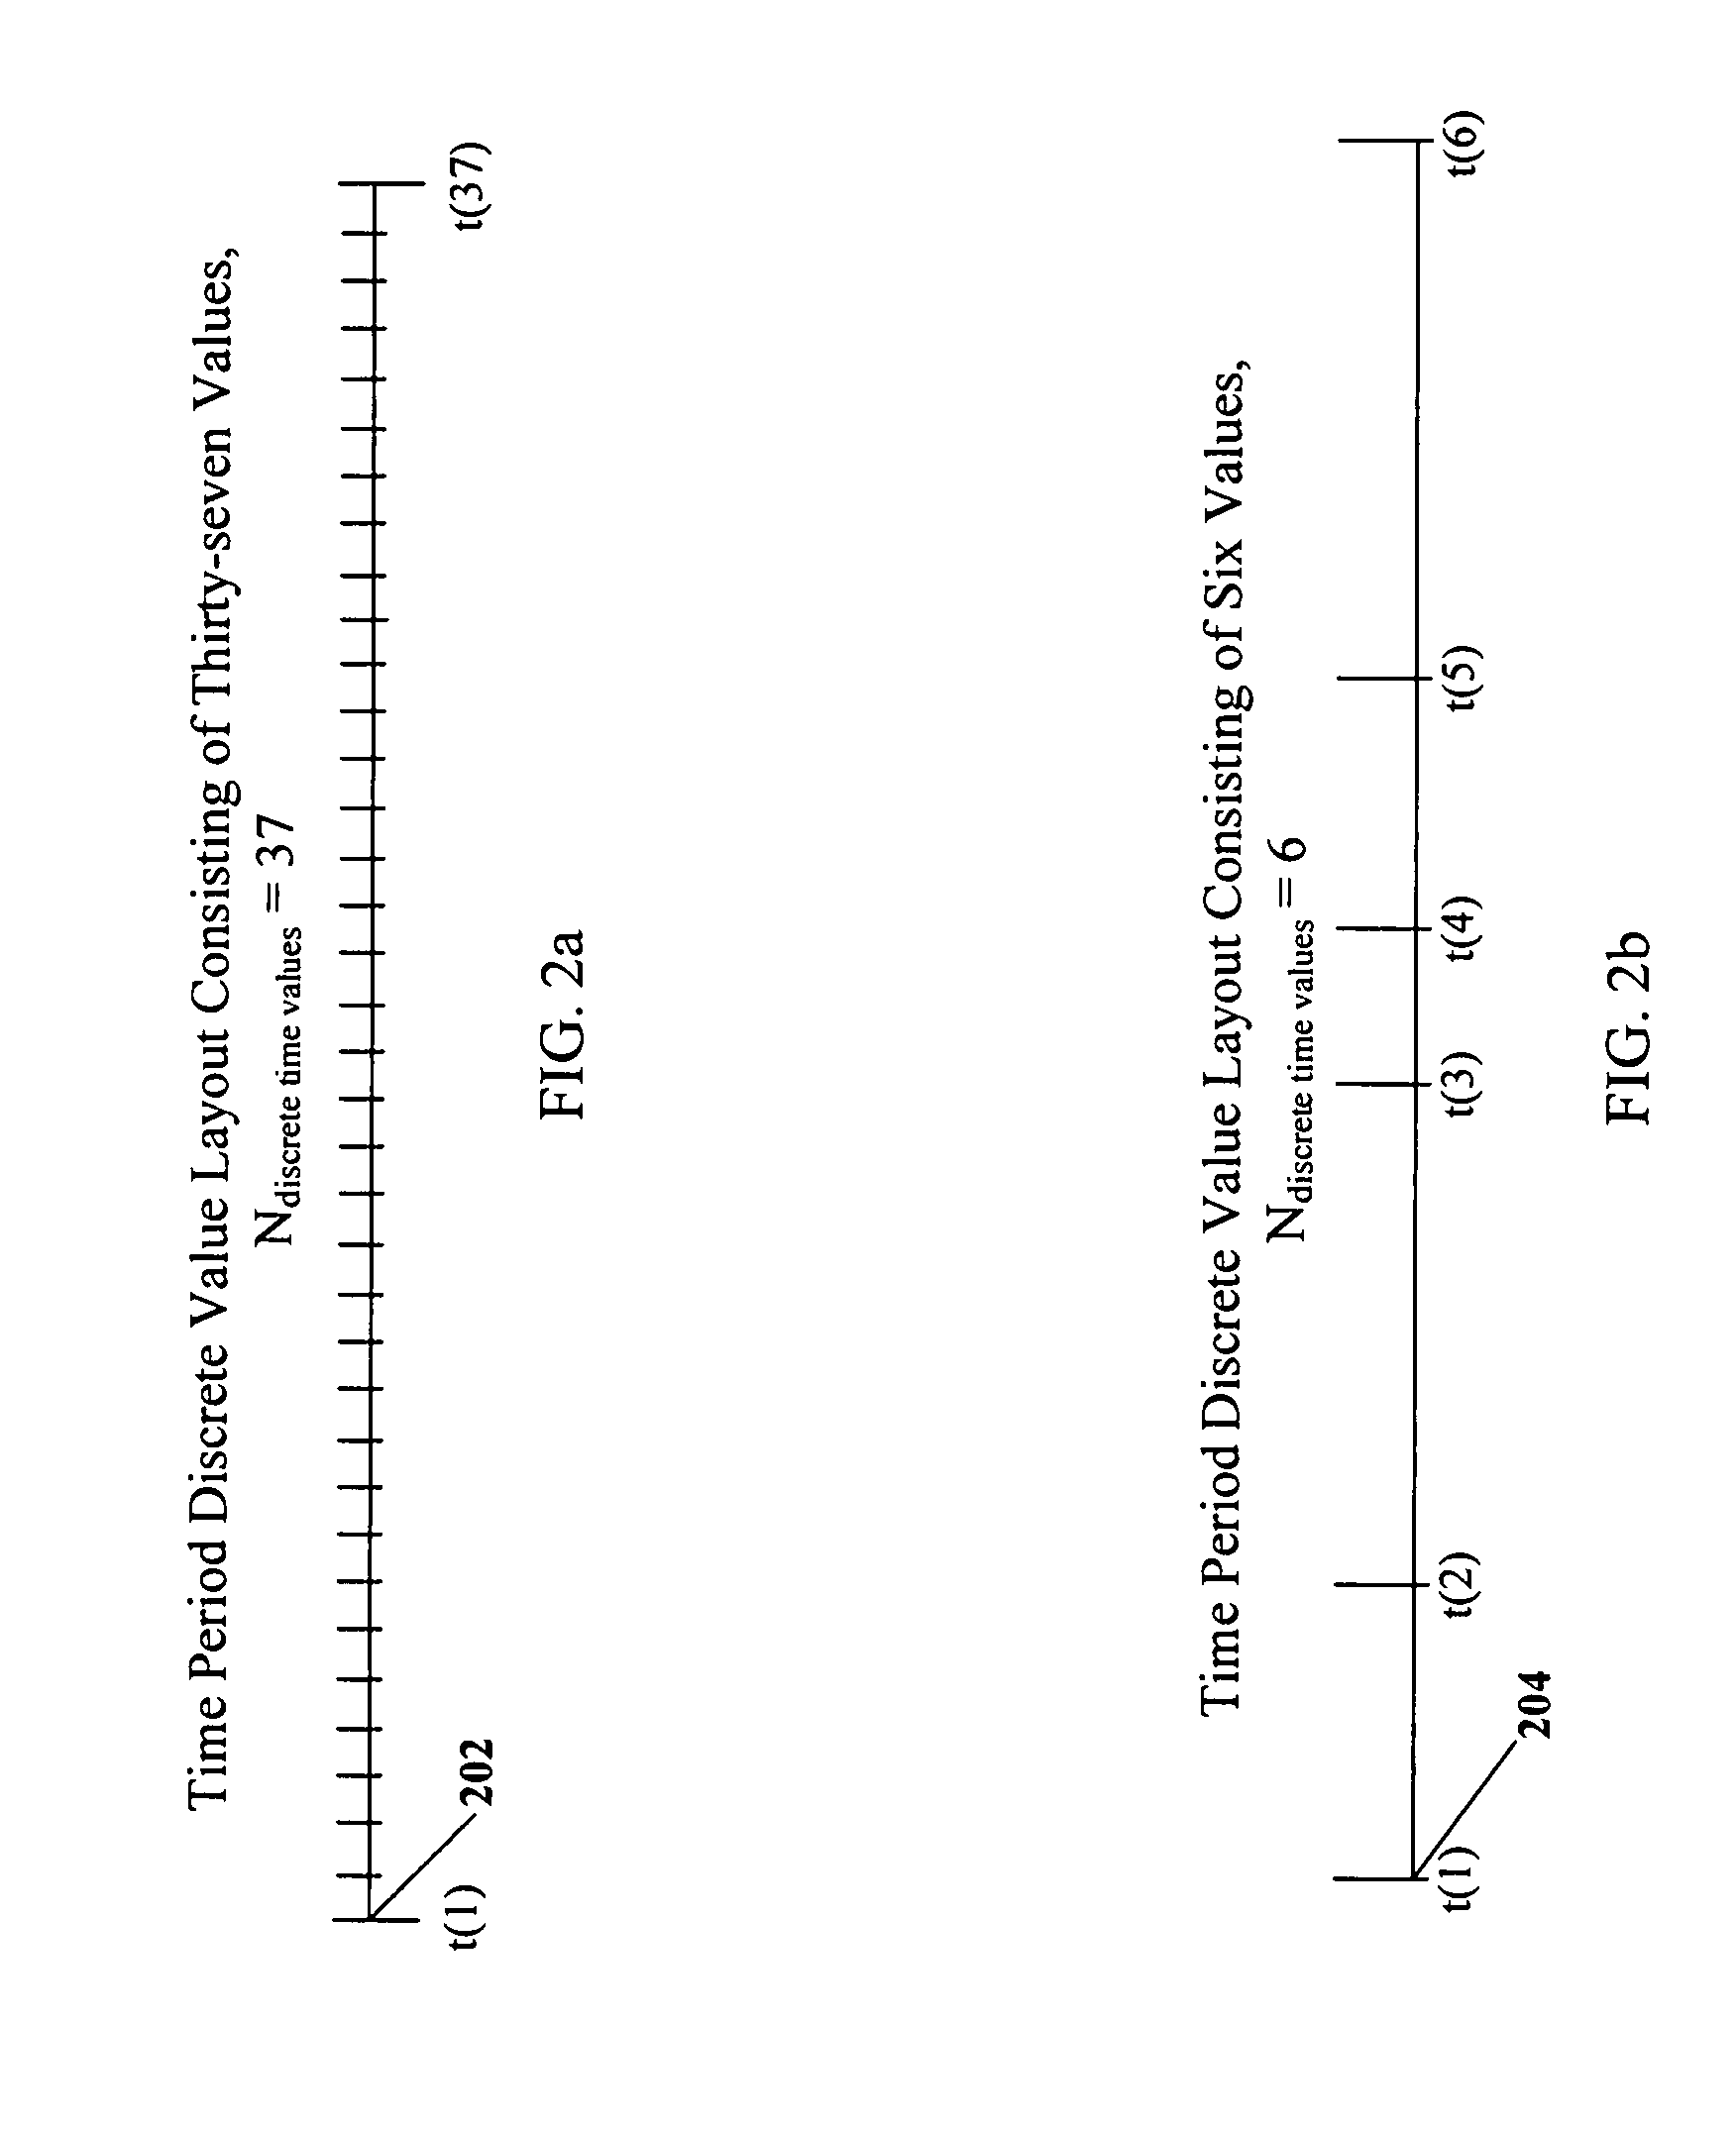 Method and apparatus for applying codes having pre-defined properties